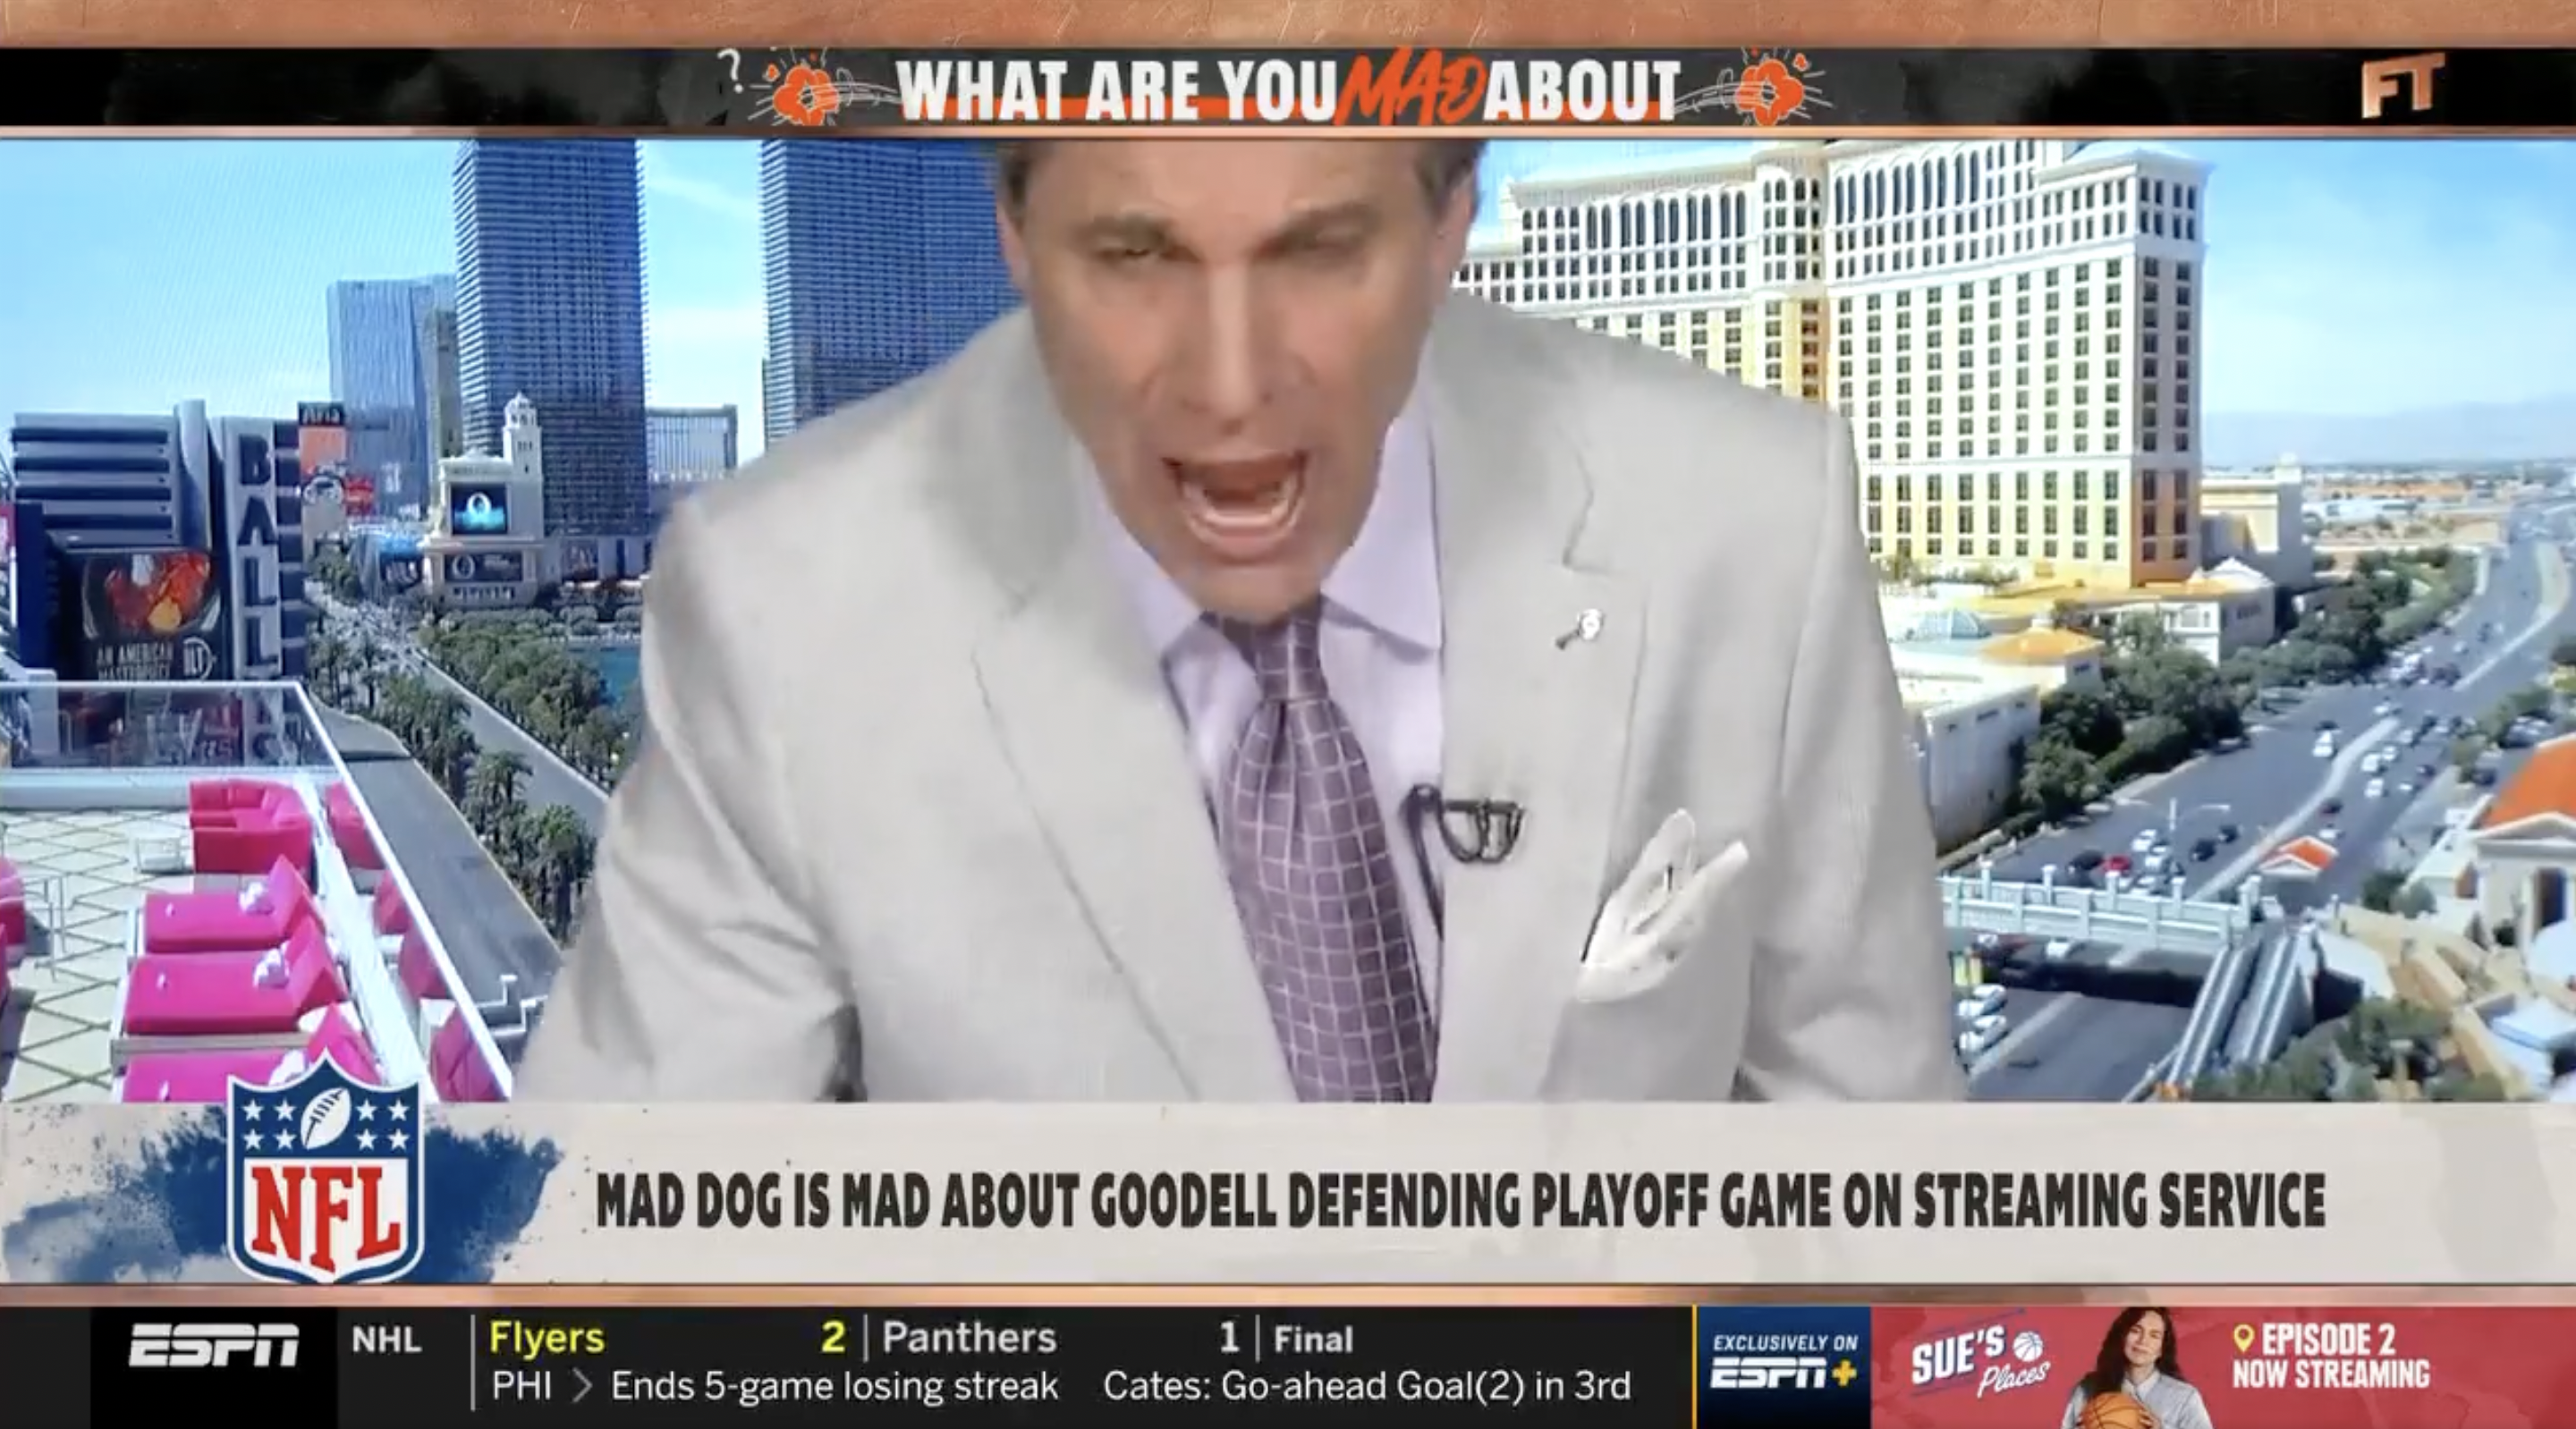 Chris "Mad Dog" Russo unloads on Roger Goodell during ESPN's "First Take."